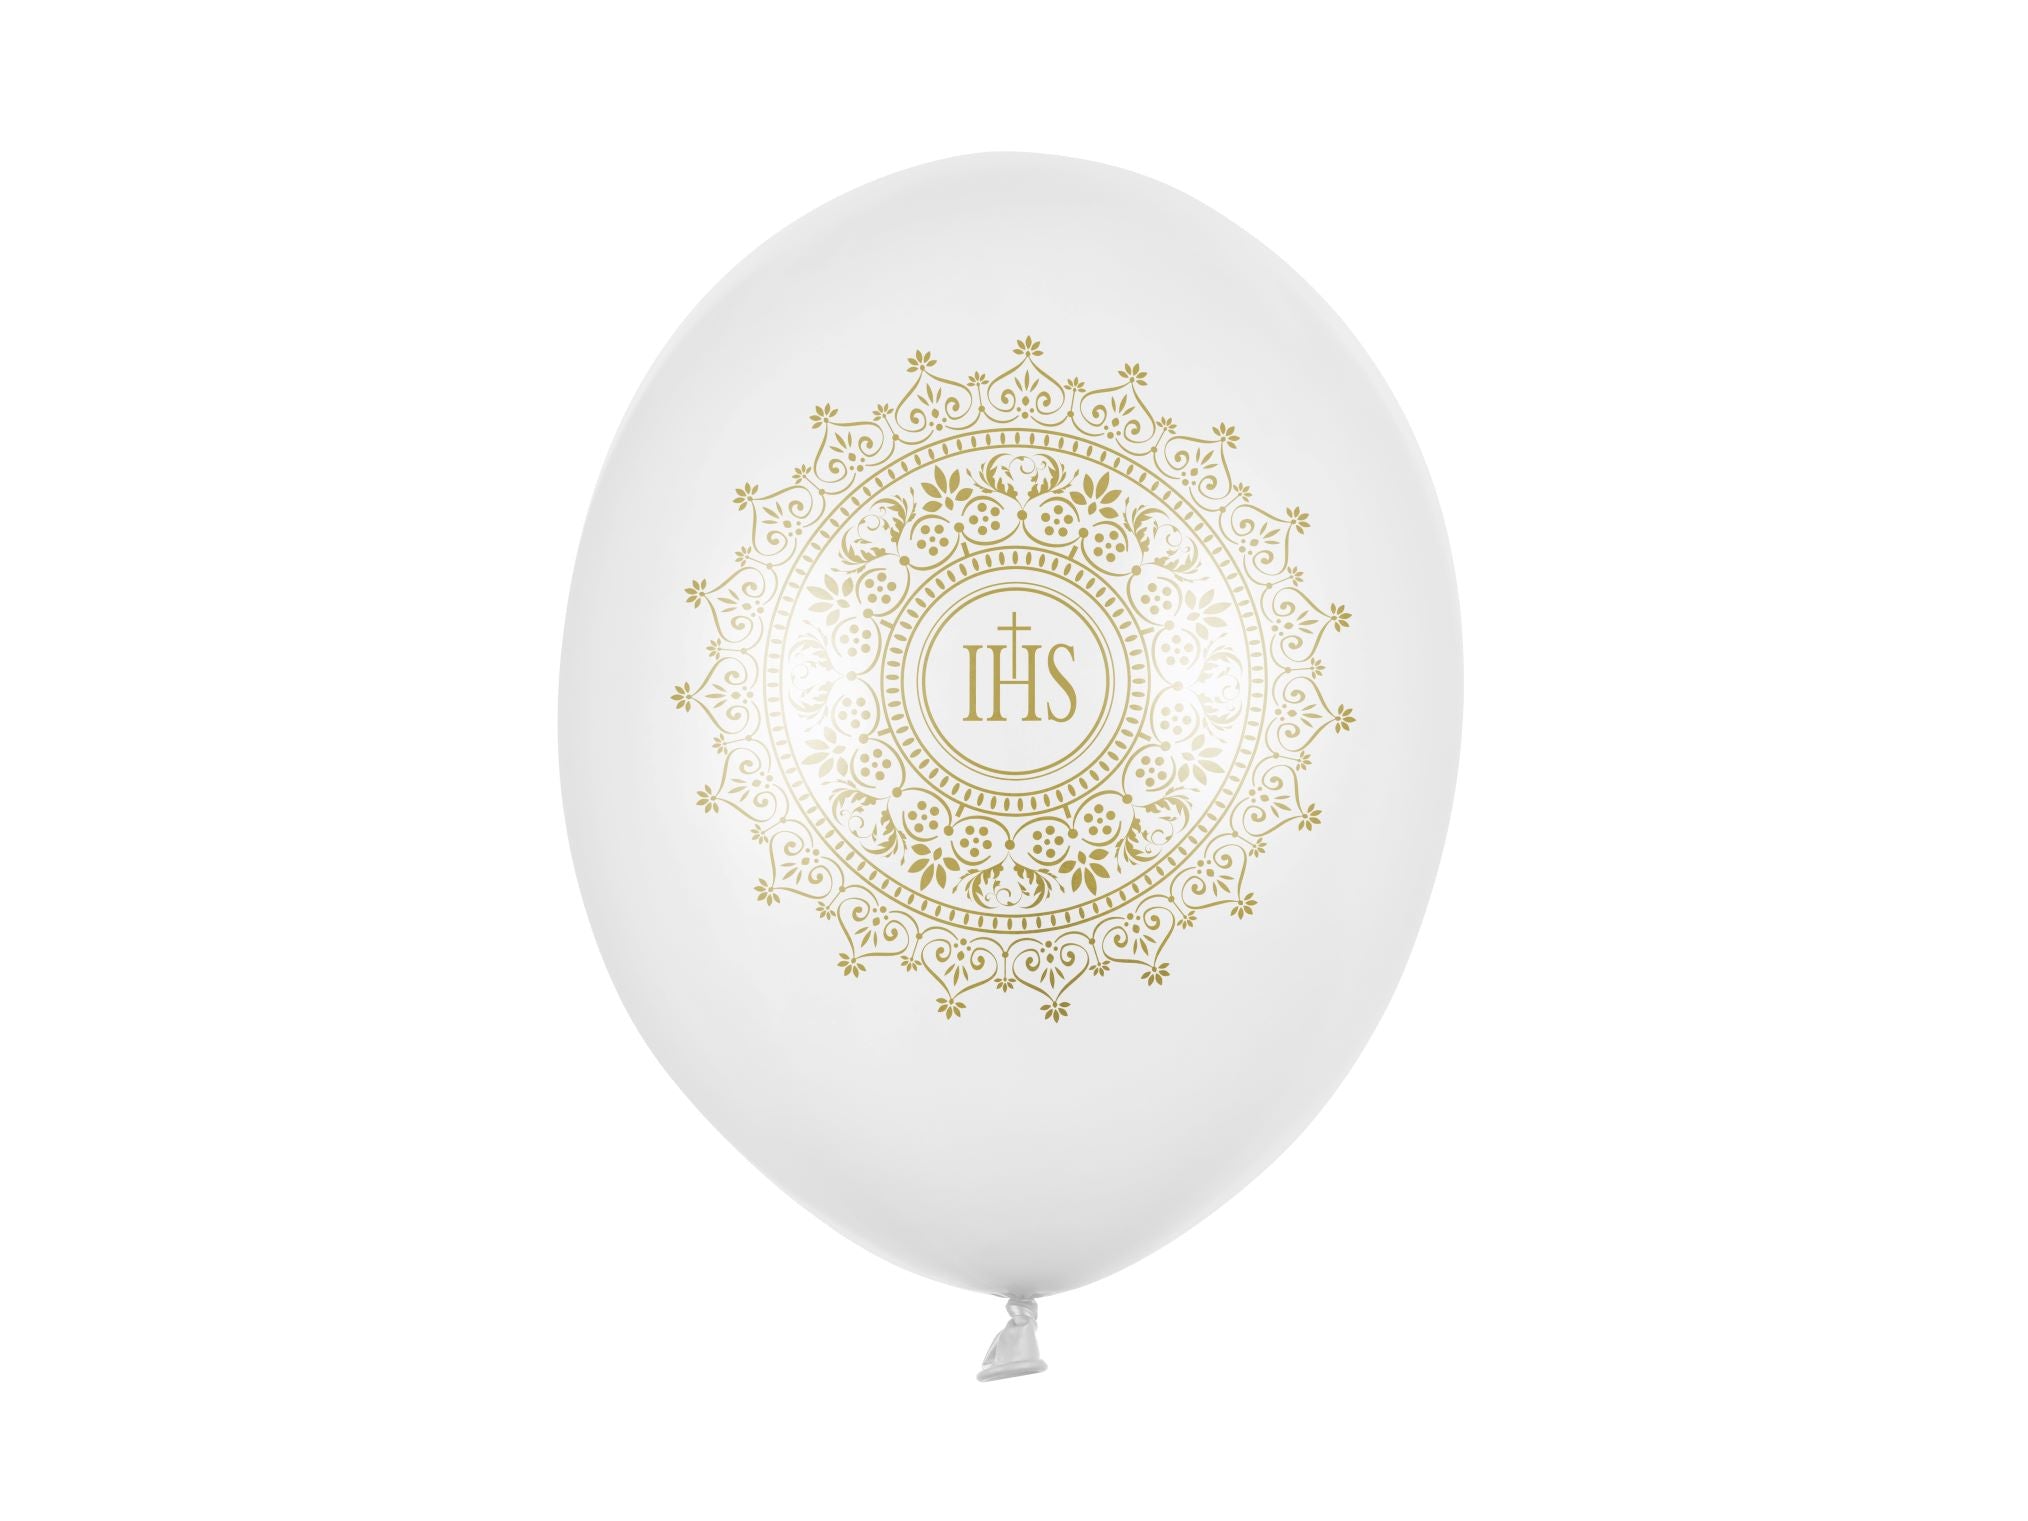 IHS Communion Balloons Pack of 6